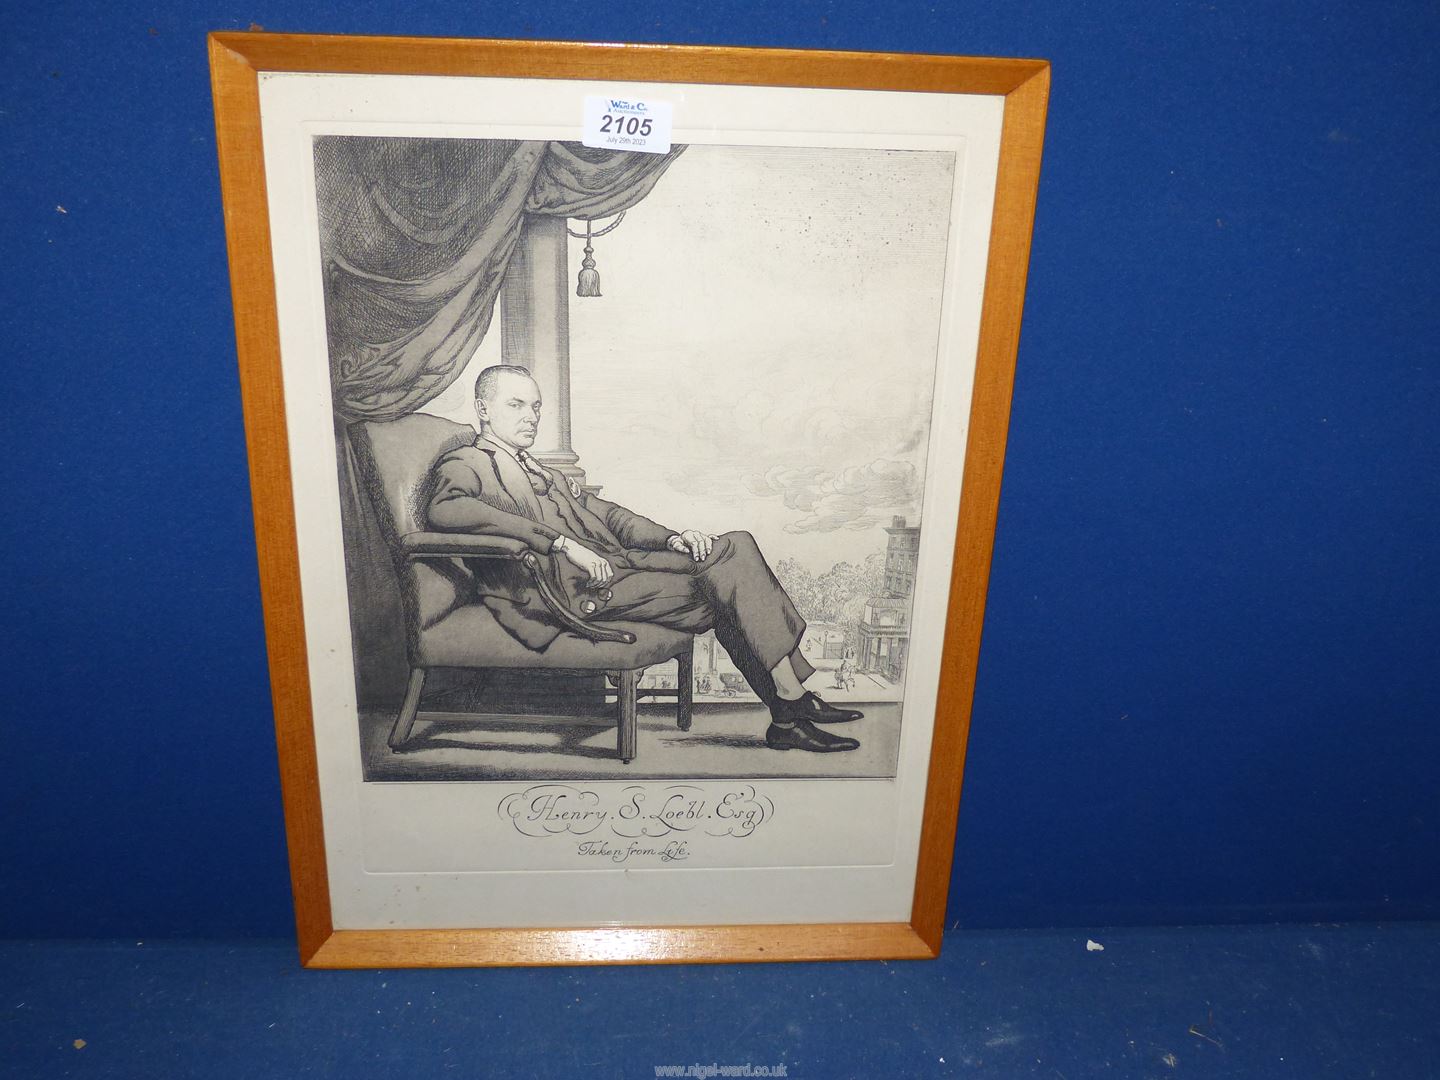 A Print of Henry S. Loebl Esq. taken from life.